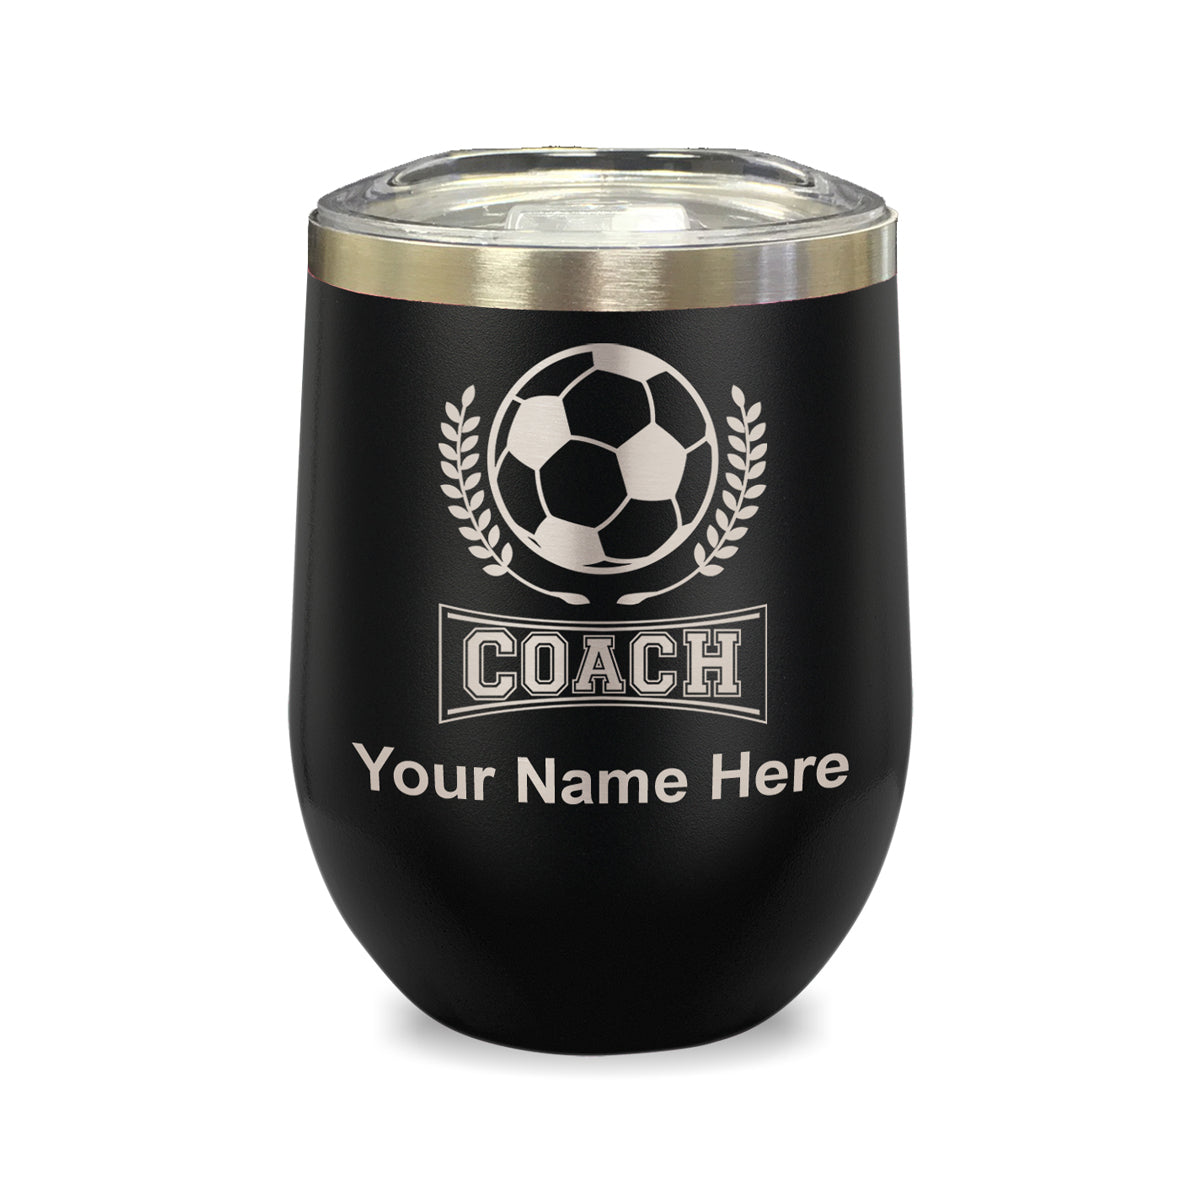 LaserGram Double Wall Stainless Steel Wine Glass, Soccer Coach, Personalized Engraving Included